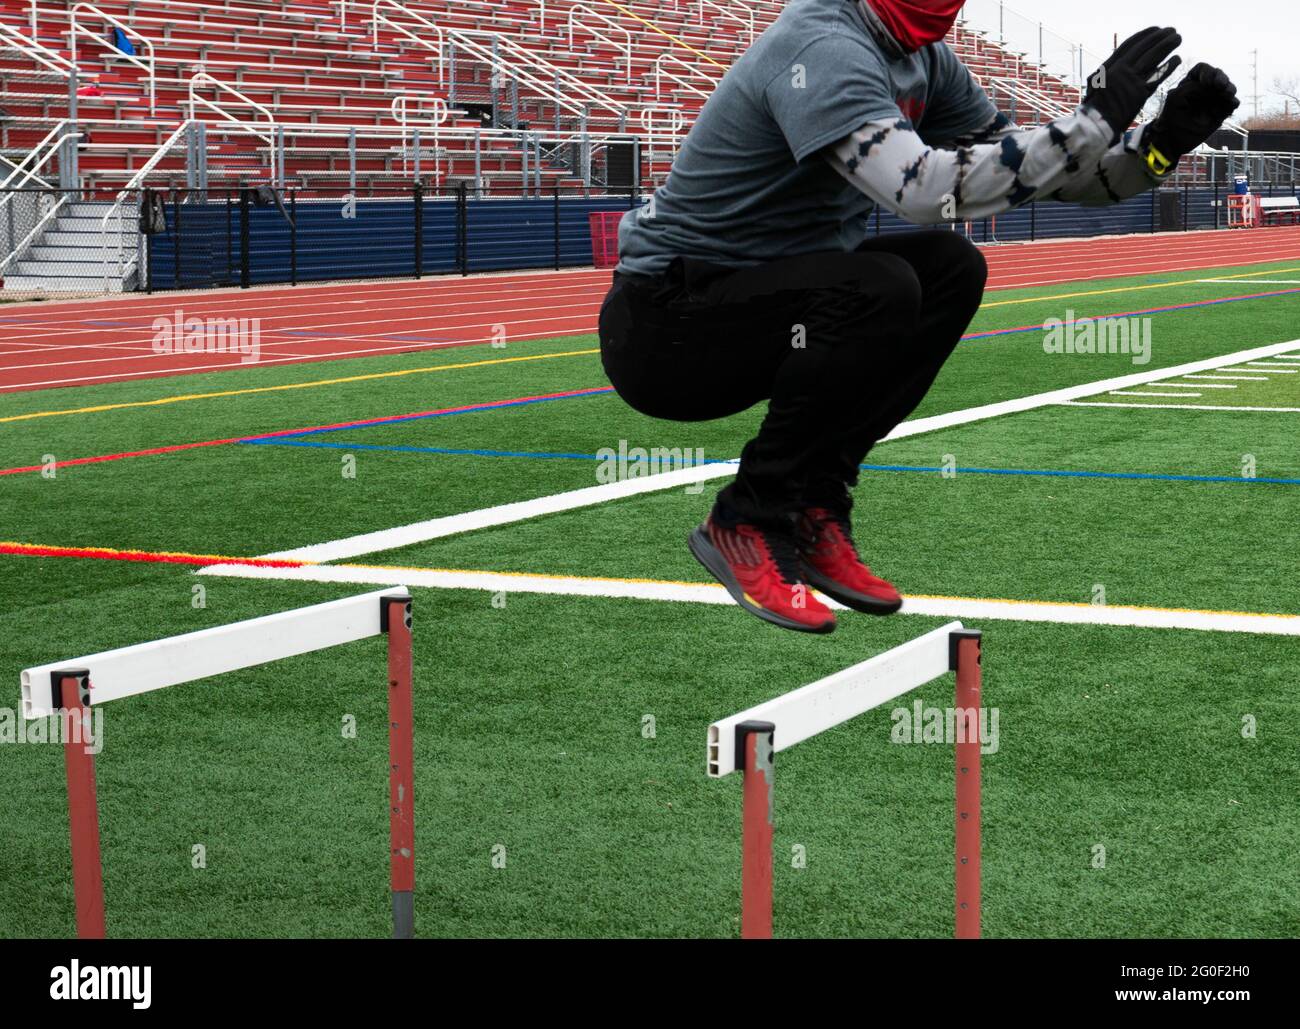 A male high school track runner is jumping over hurdles on a green turf field during track and field practice in the winter. Stock Photo